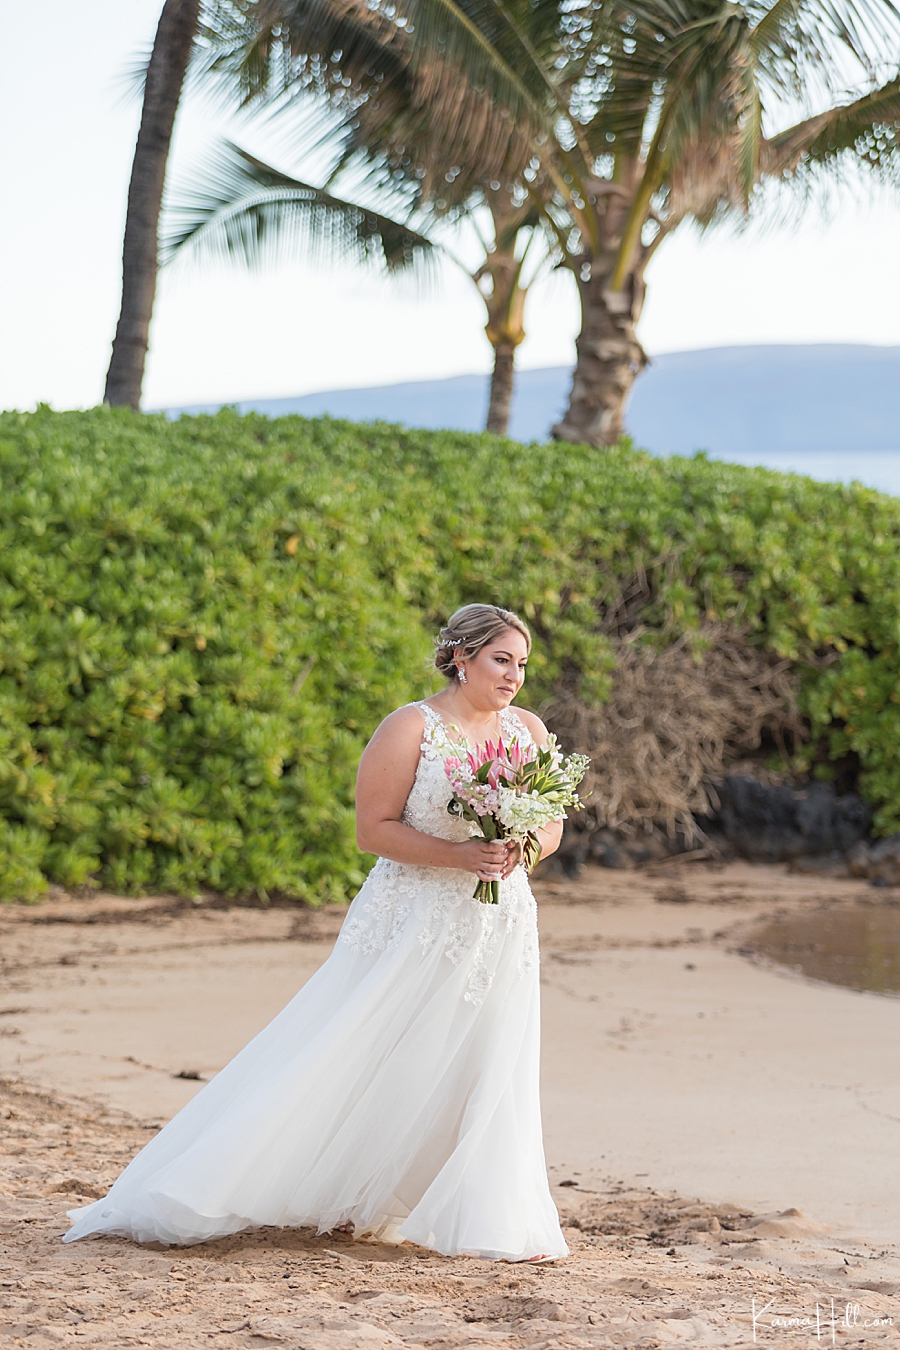 elope in Maui - ceremony